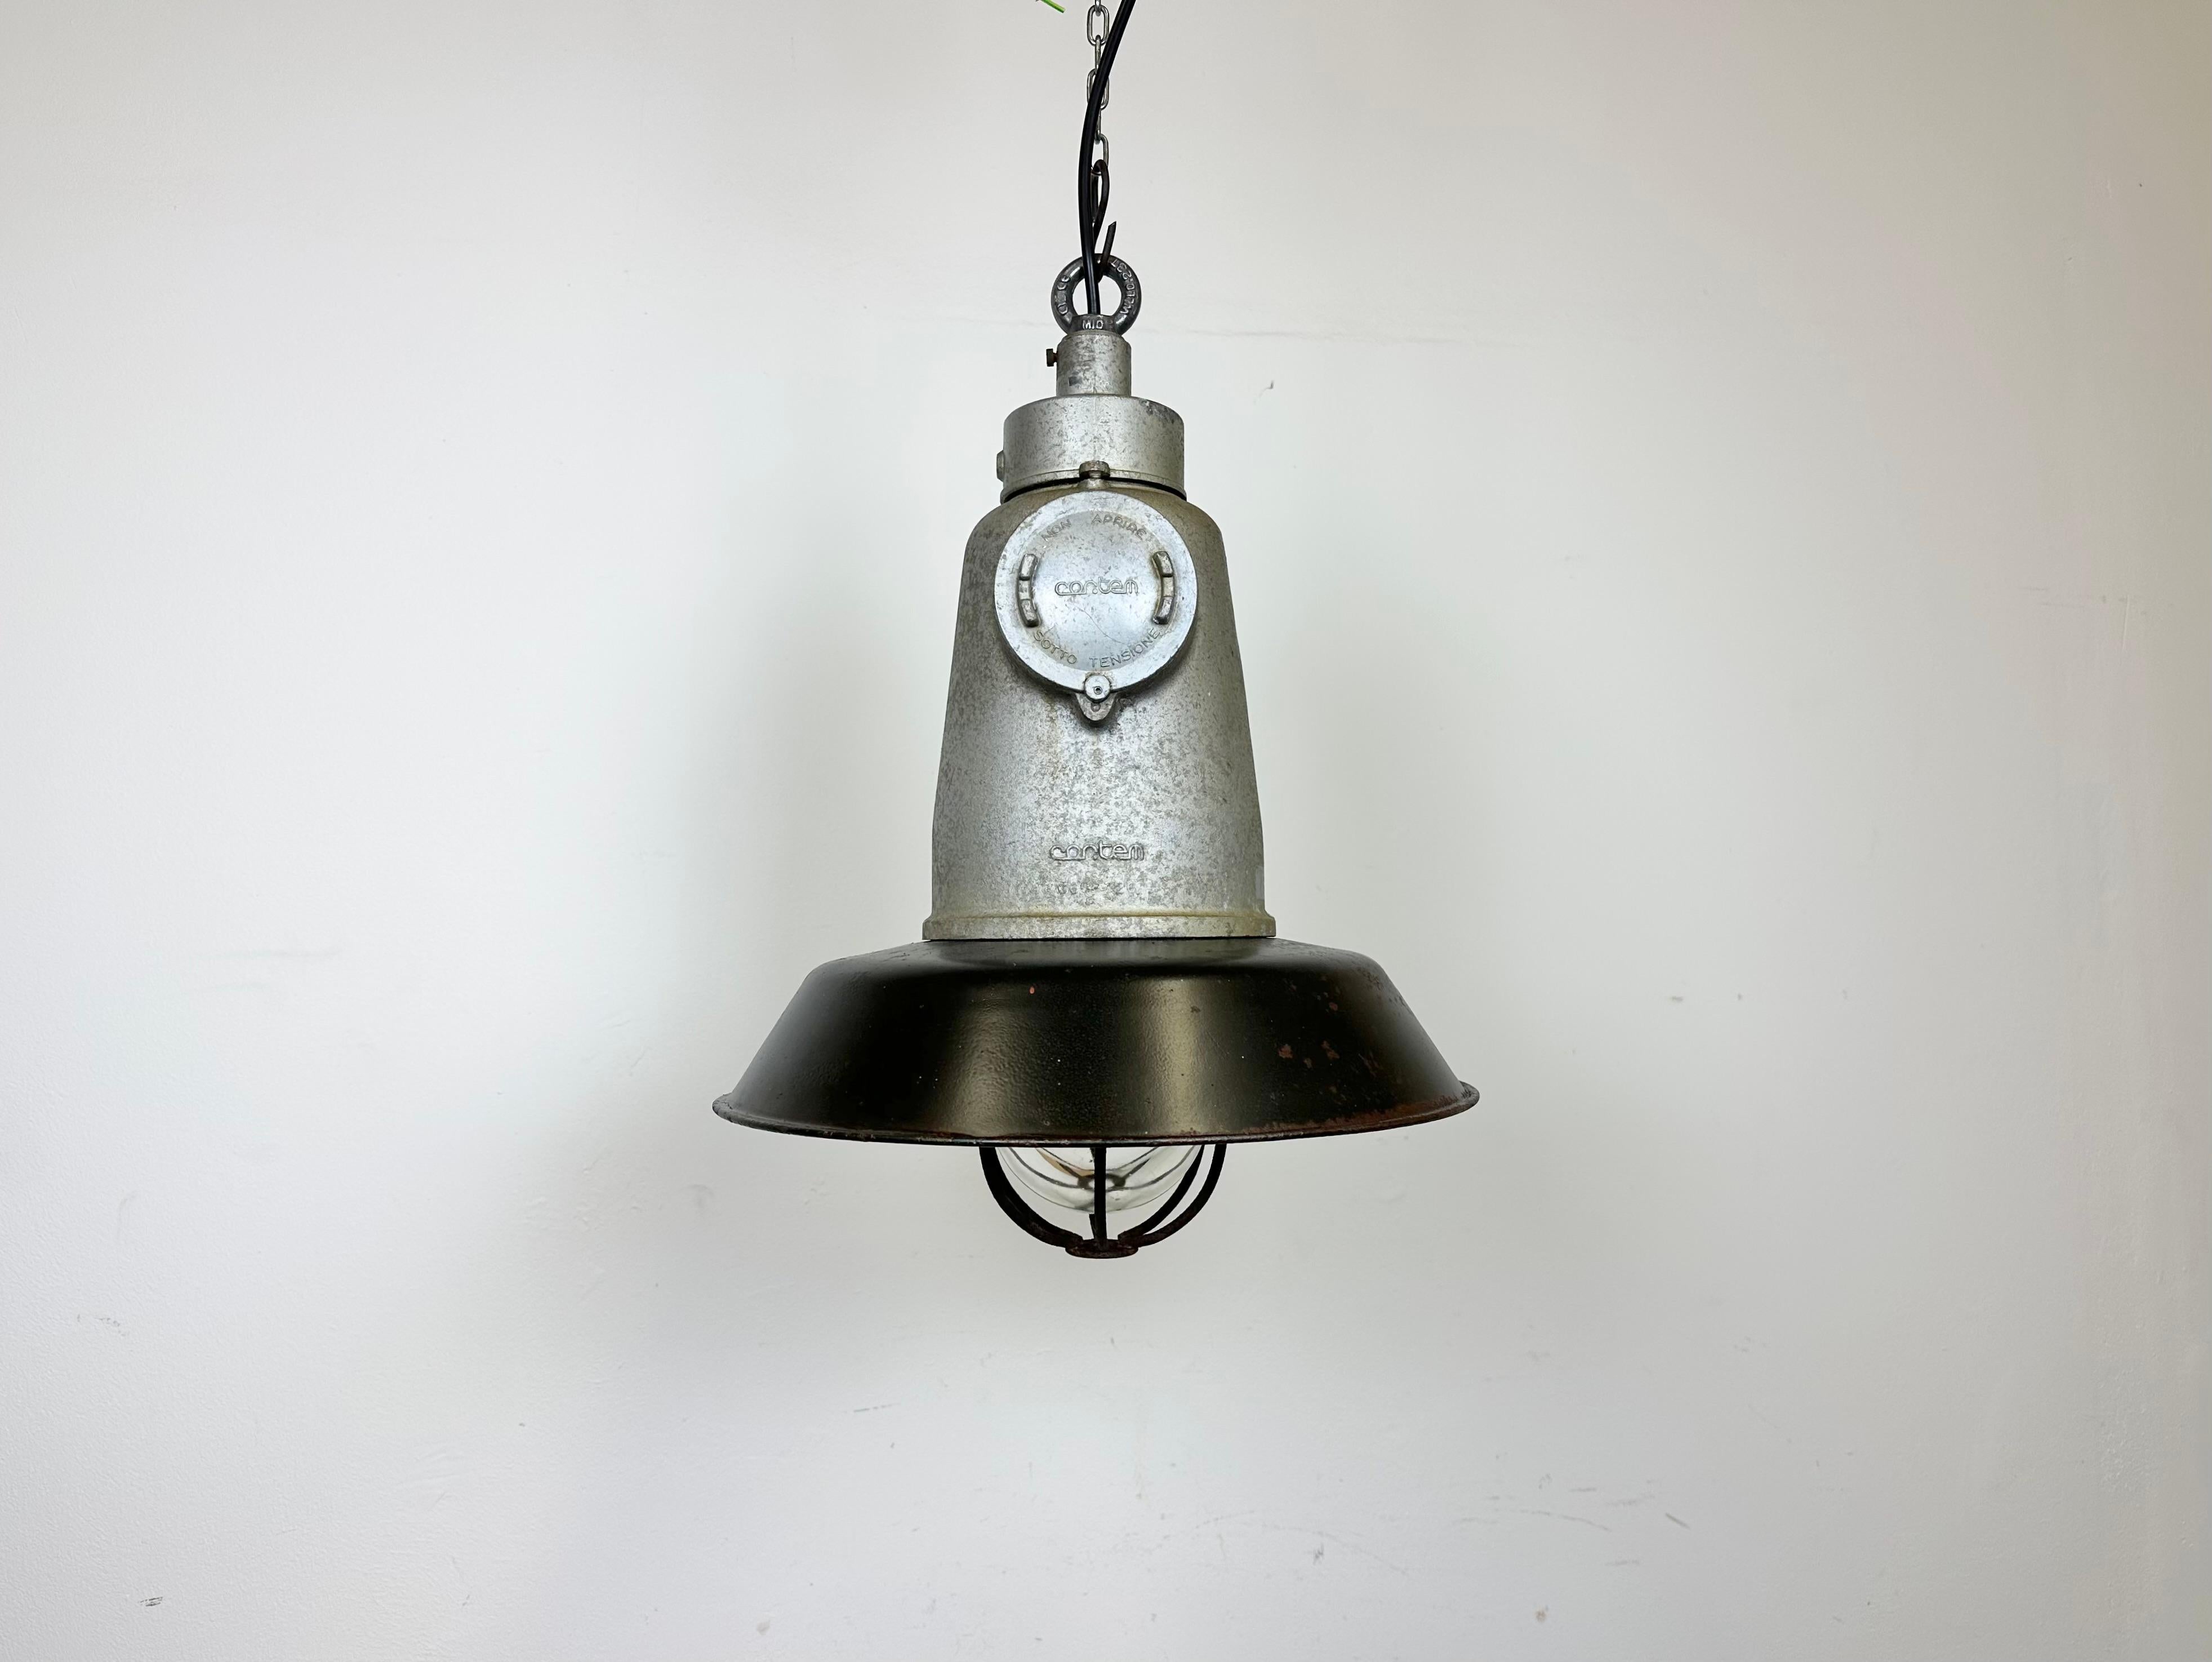 Large industrial factory hanging lamp made by Cortem Milano in Italy during the 1960s. It features a cast aluminium top, a black enamel shade with white enamel interior,a clear glass cover and an iron grid. The porcelain socket requires E 27/ E26